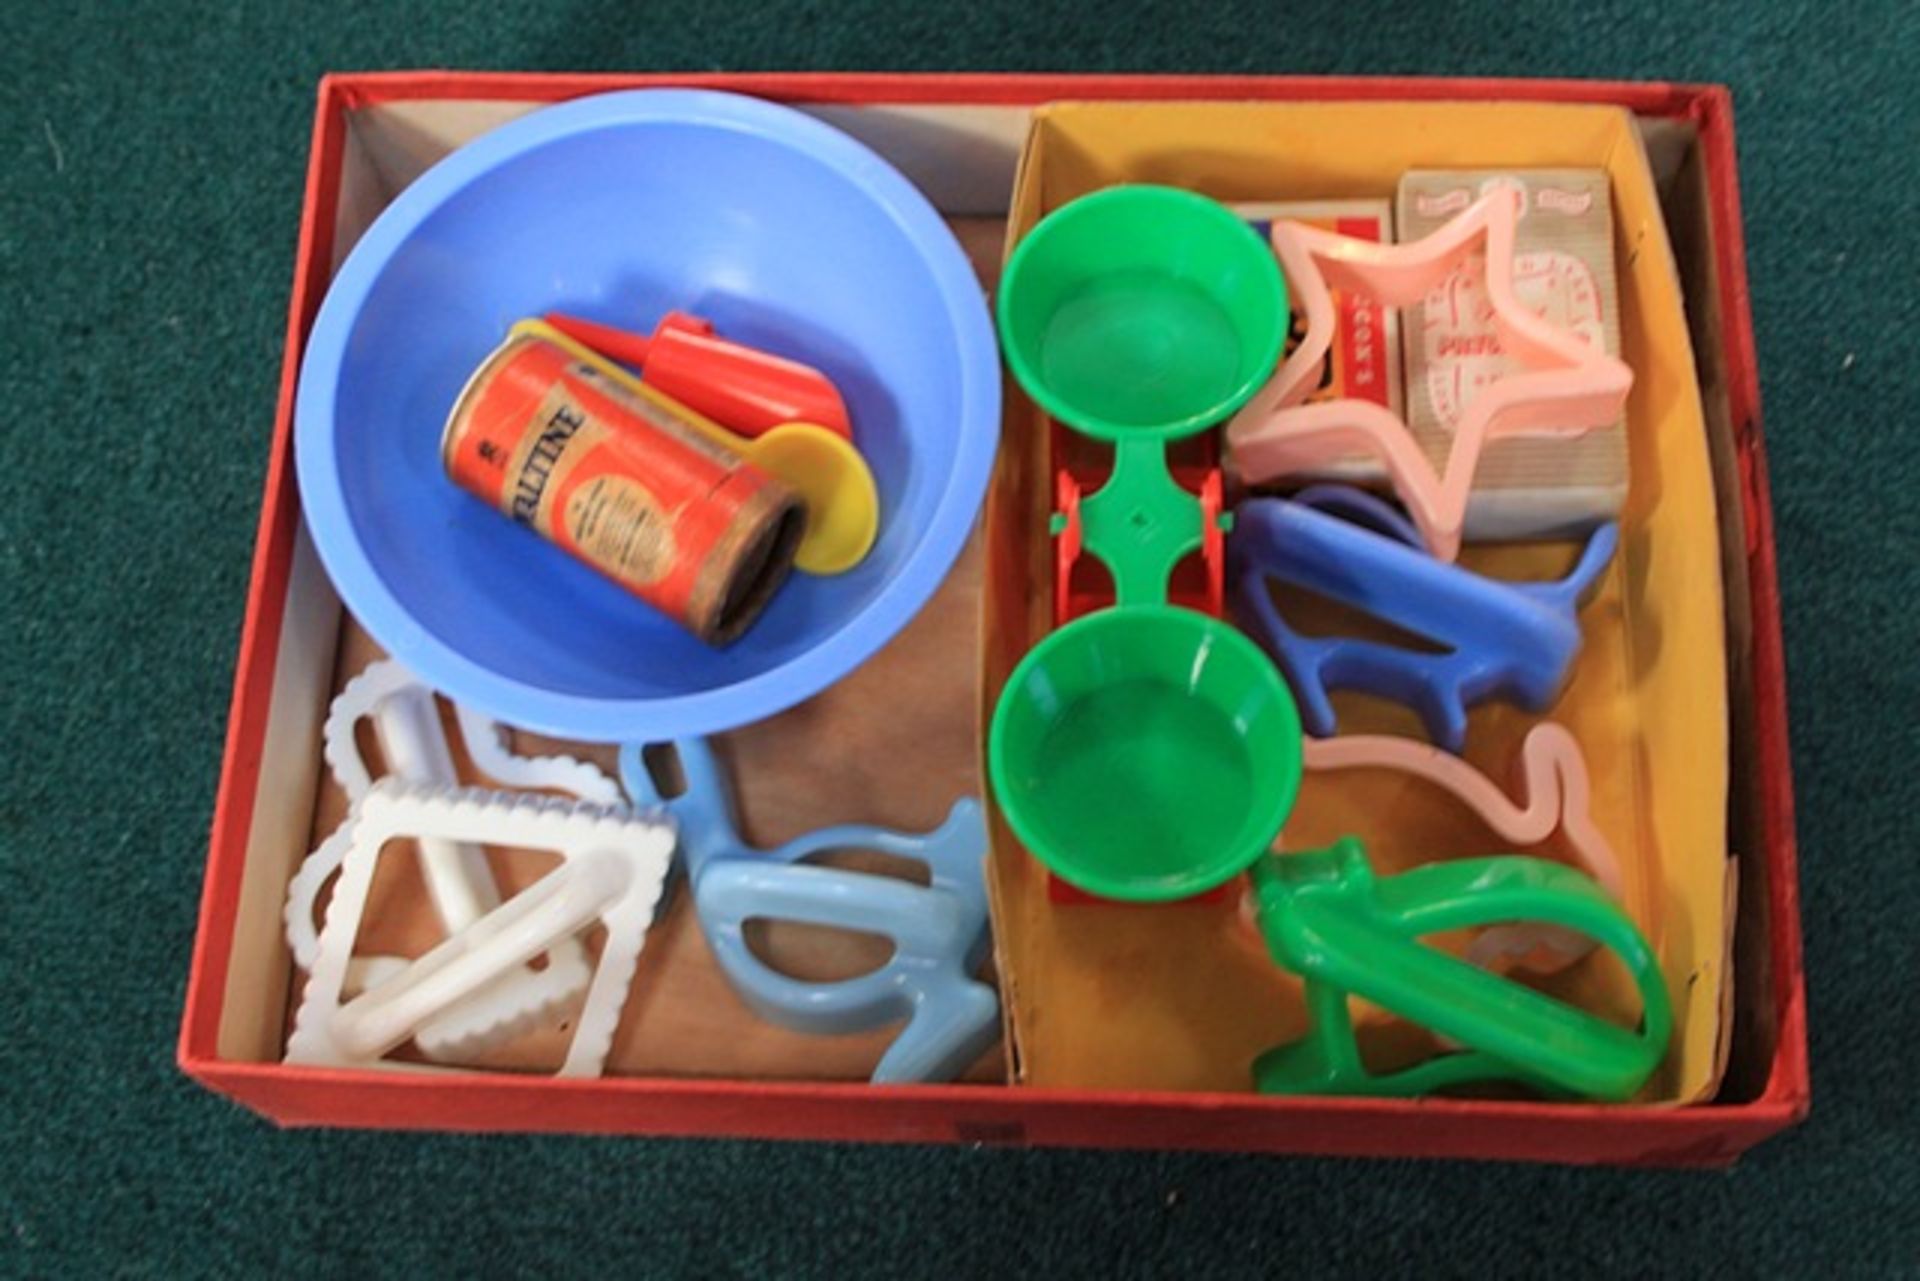 Merit Pastry Set 1950/60s Vintage Toy Pastry Set In It's Original Box. The Set Includes A Wooden - Image 2 of 2